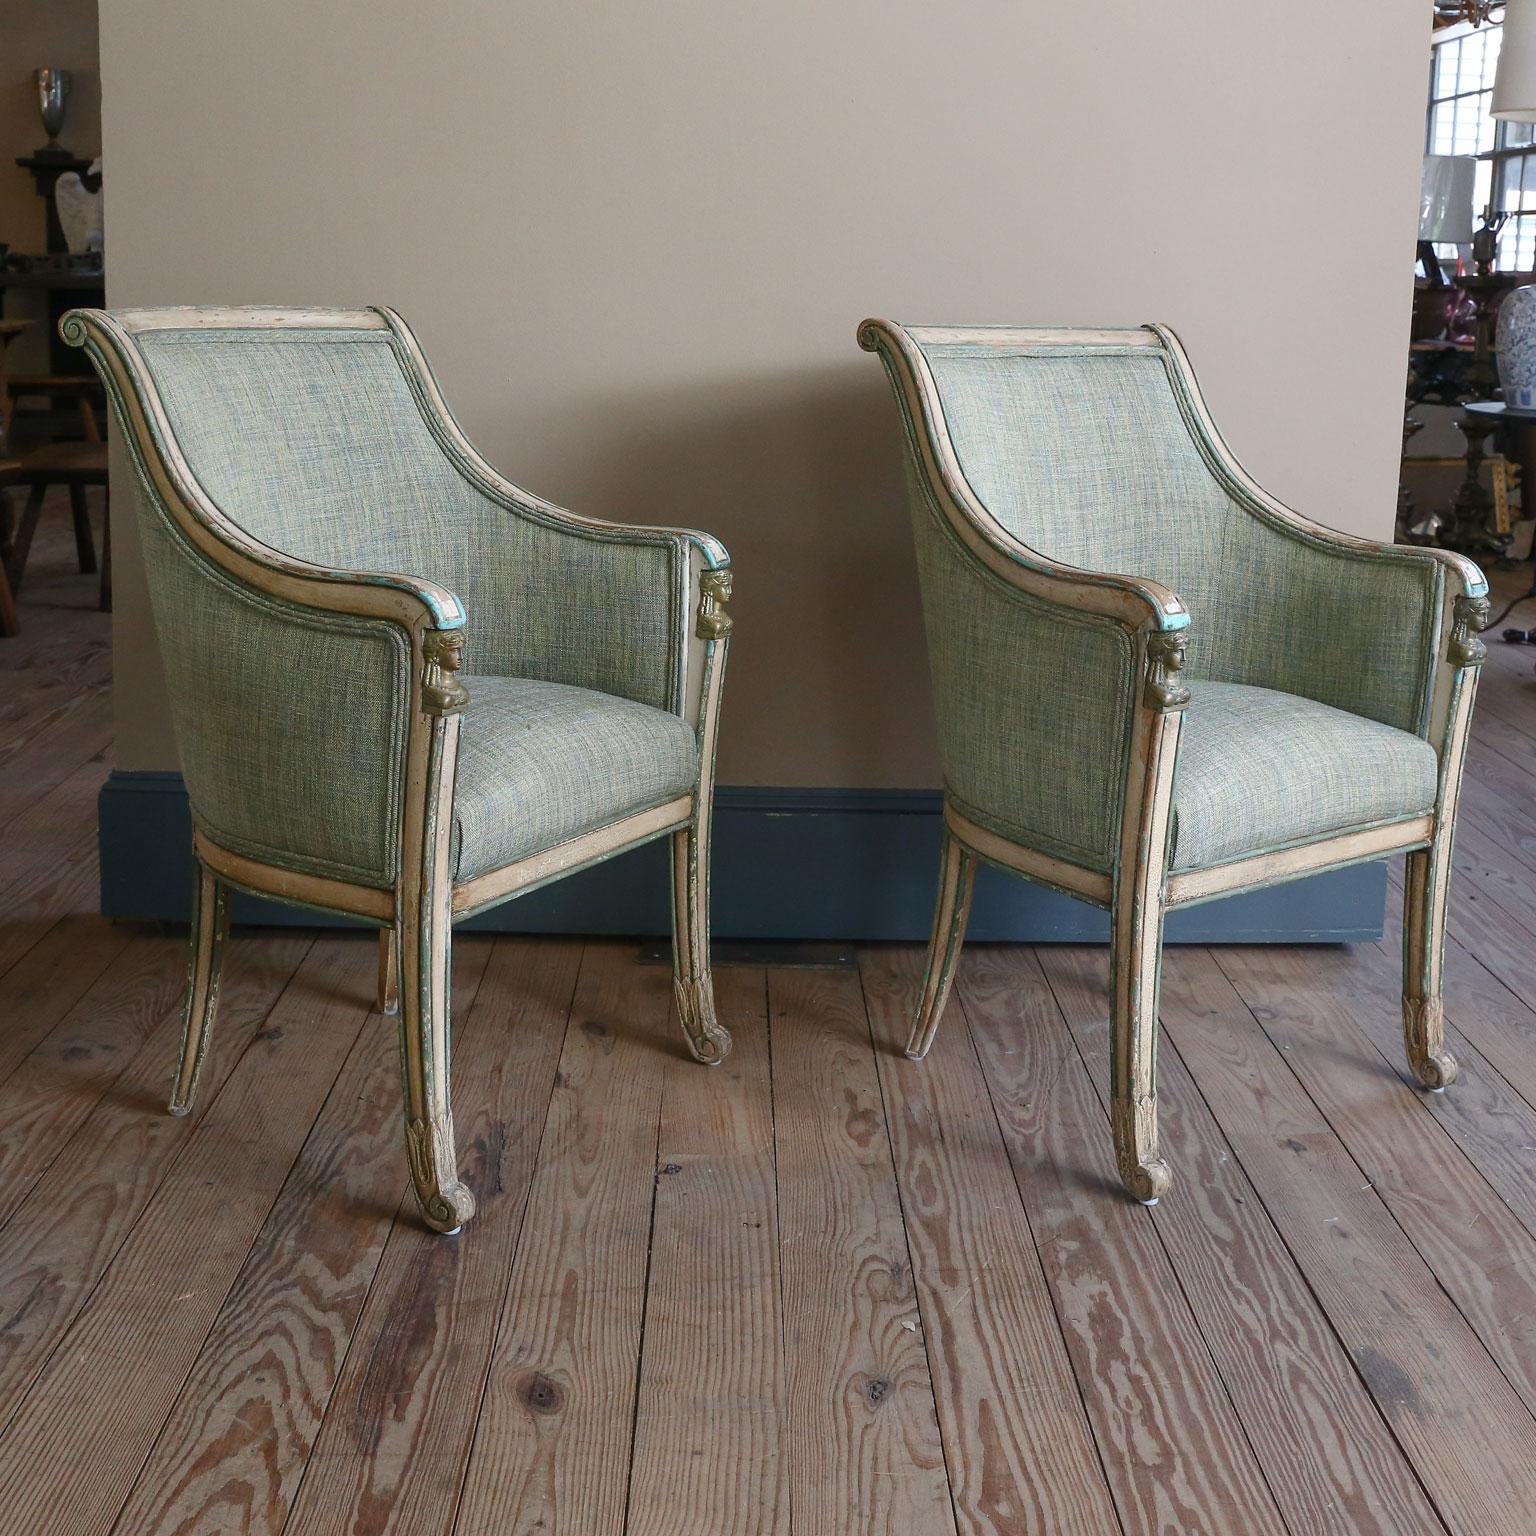 These fabulous pair of chairs have their original painted finish and a cast brass piece under each arm. I am not sure if that piece is Classical Greek, Roman or Egyptian. They have been newly restored and upholstered. Naturally, the fabric may not